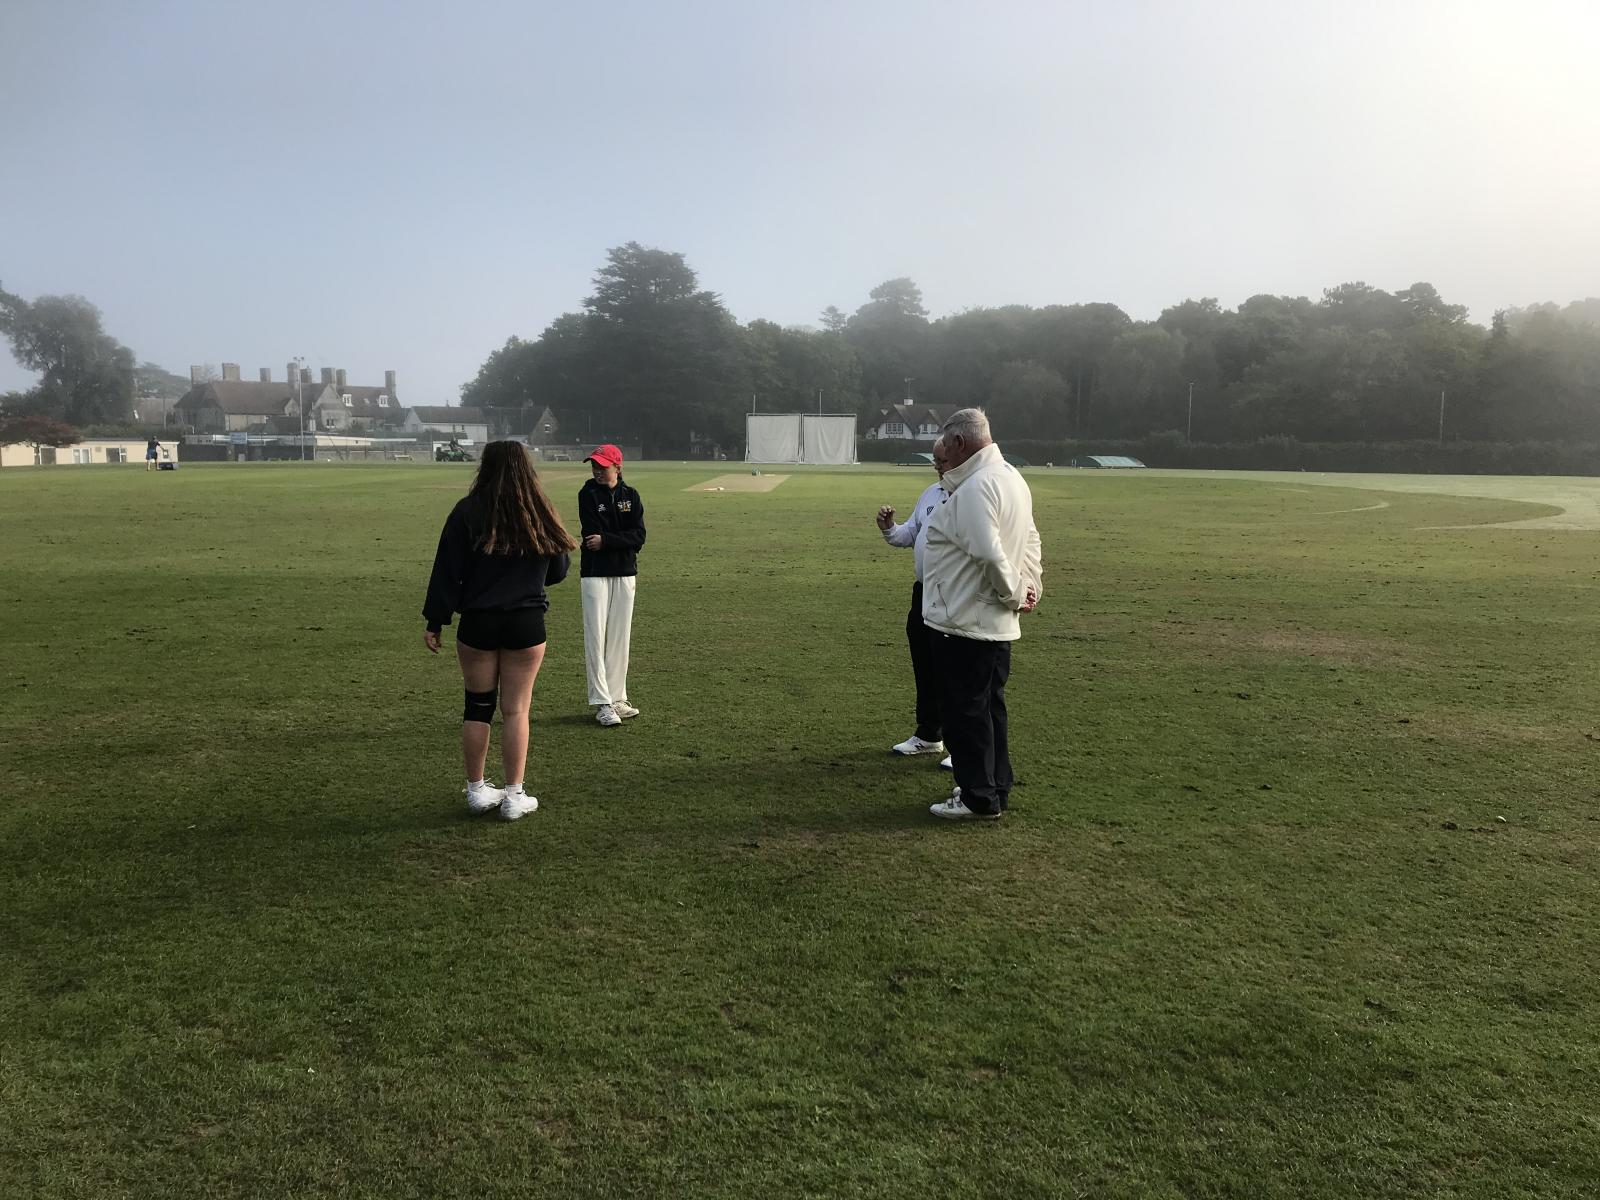 A misty start soon gave way to a beautiful day of cricket